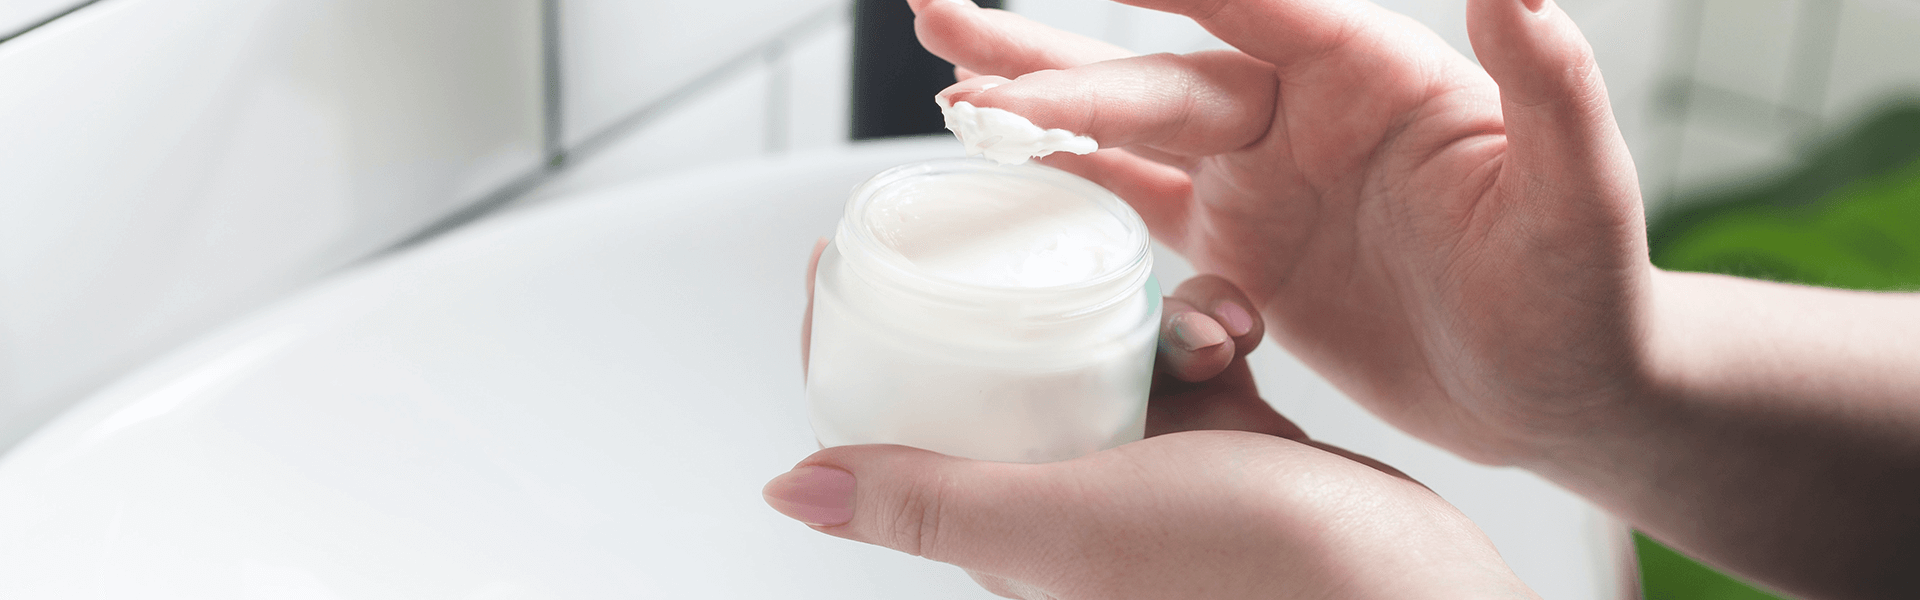 How To Choose A Moisturiser If You Have Acne